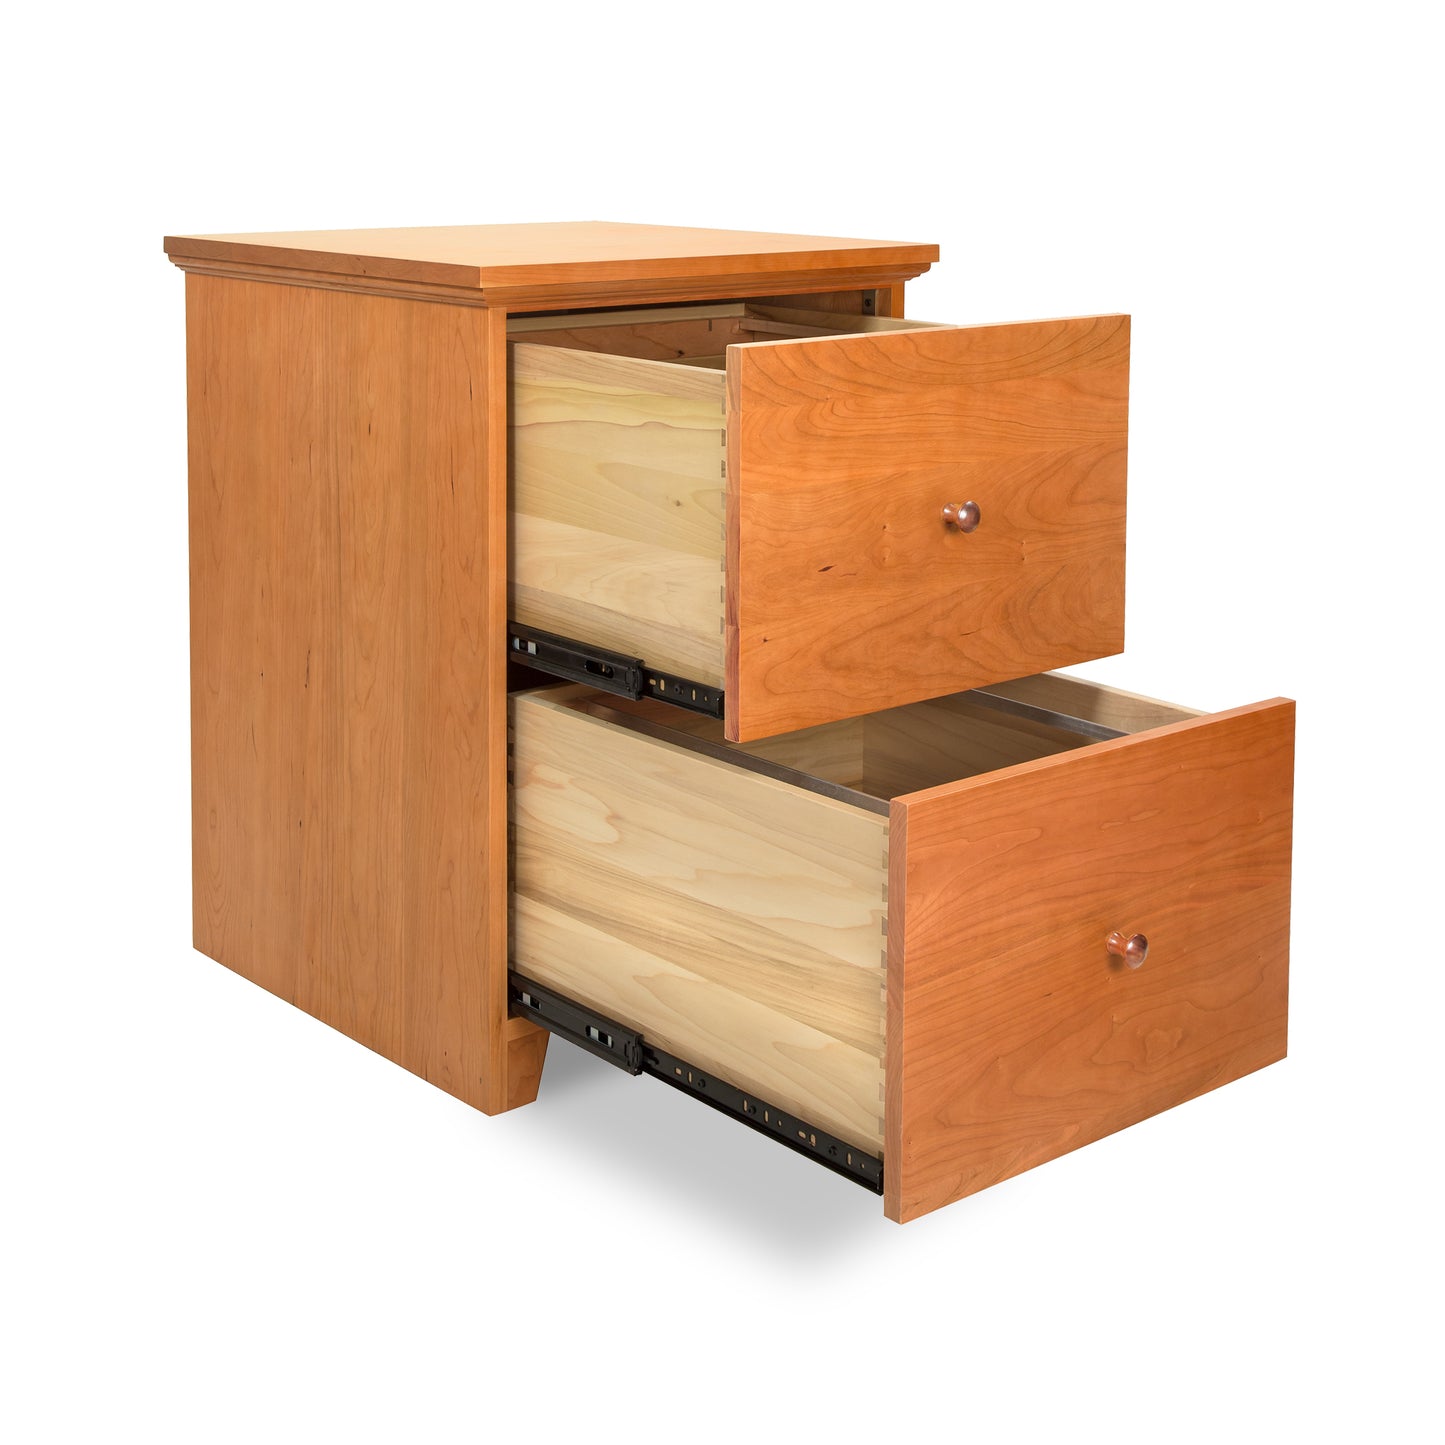 A Lyndon Furniture Shaker 2-Drawer Vertical File Cabinet made of cherry wood.